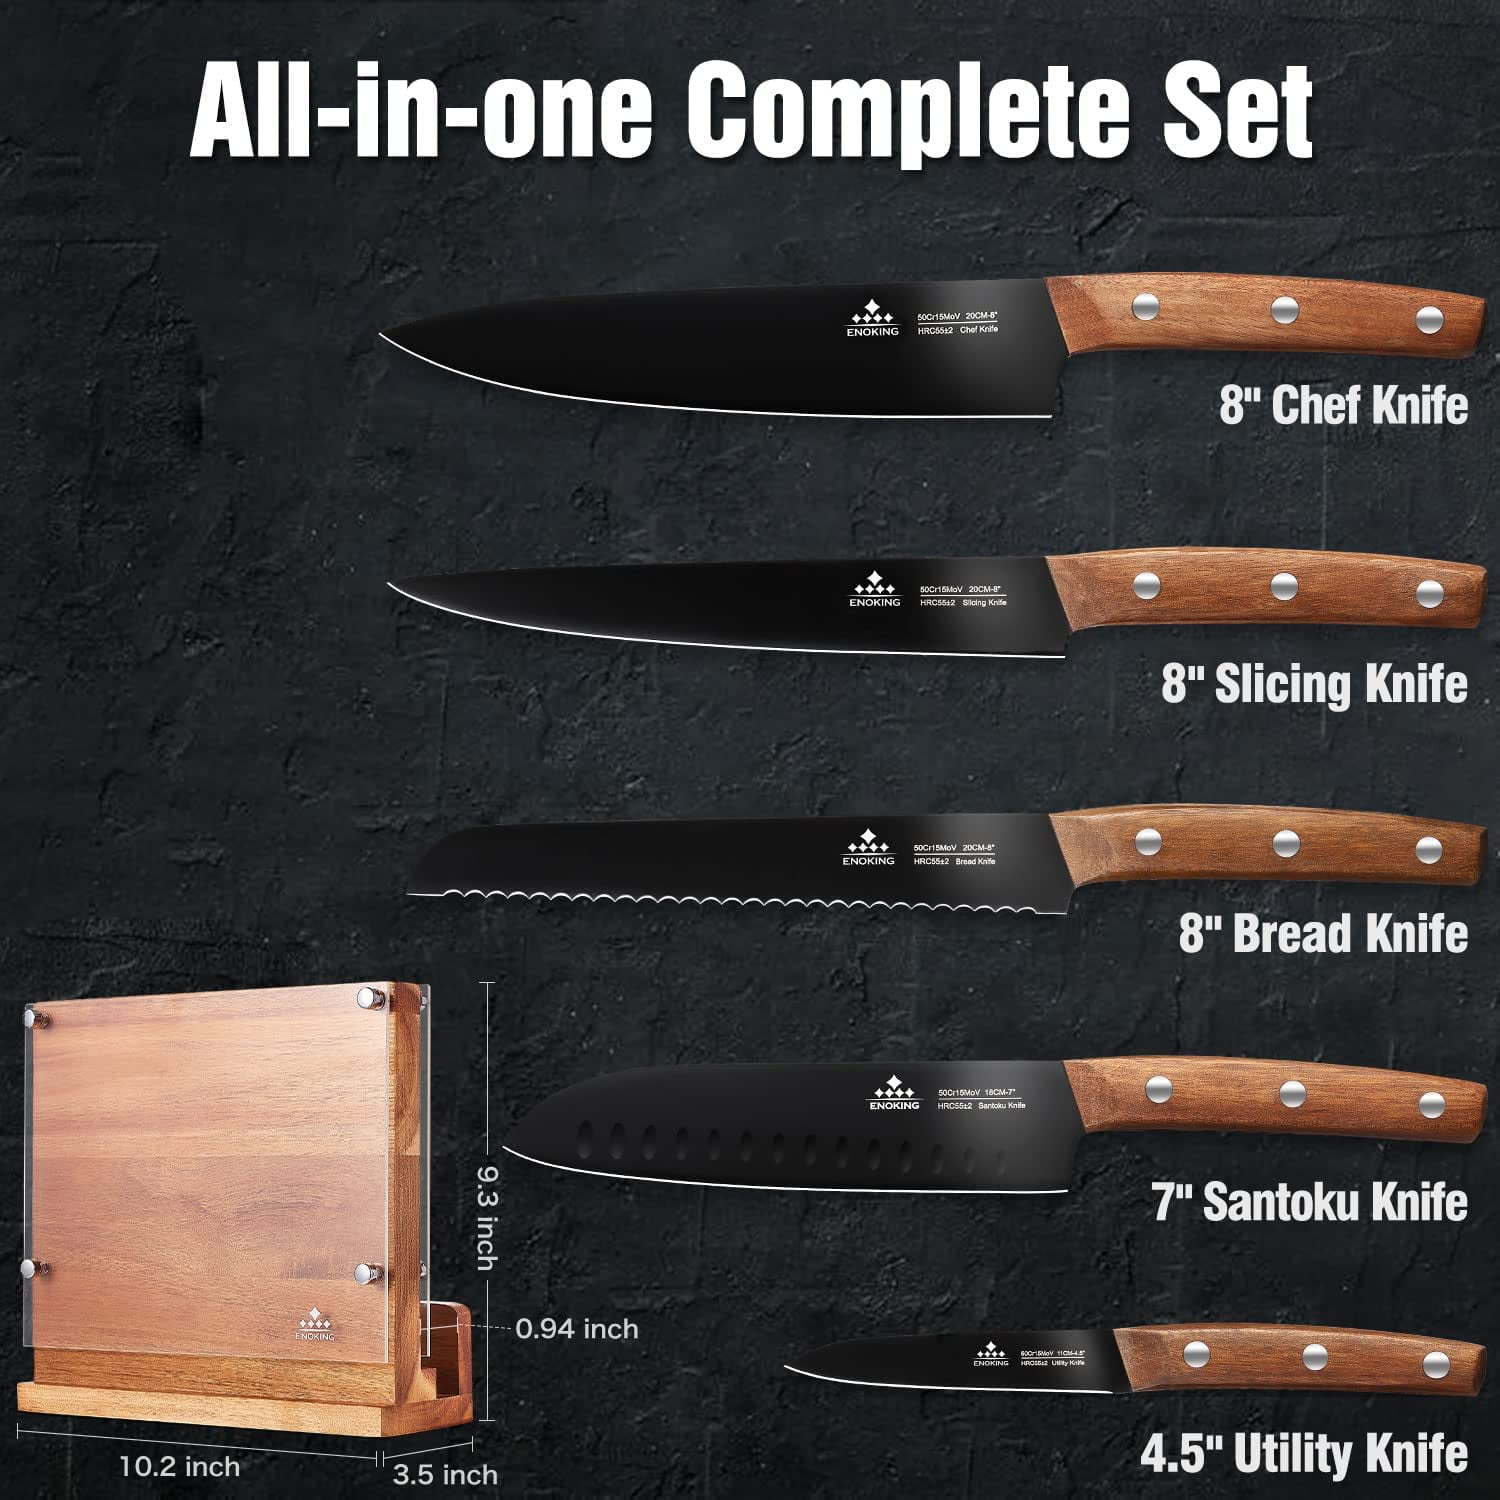 ENOKING Knife Set, 15 Pieces Knife Set with Wooden Block and Sharpener,  Stainless Steel Kitchen Knife Block Set Ultra Sharp, Professional Knife Set  with Kitchen Scissors, Meat Fork and 6 Steak Knives (